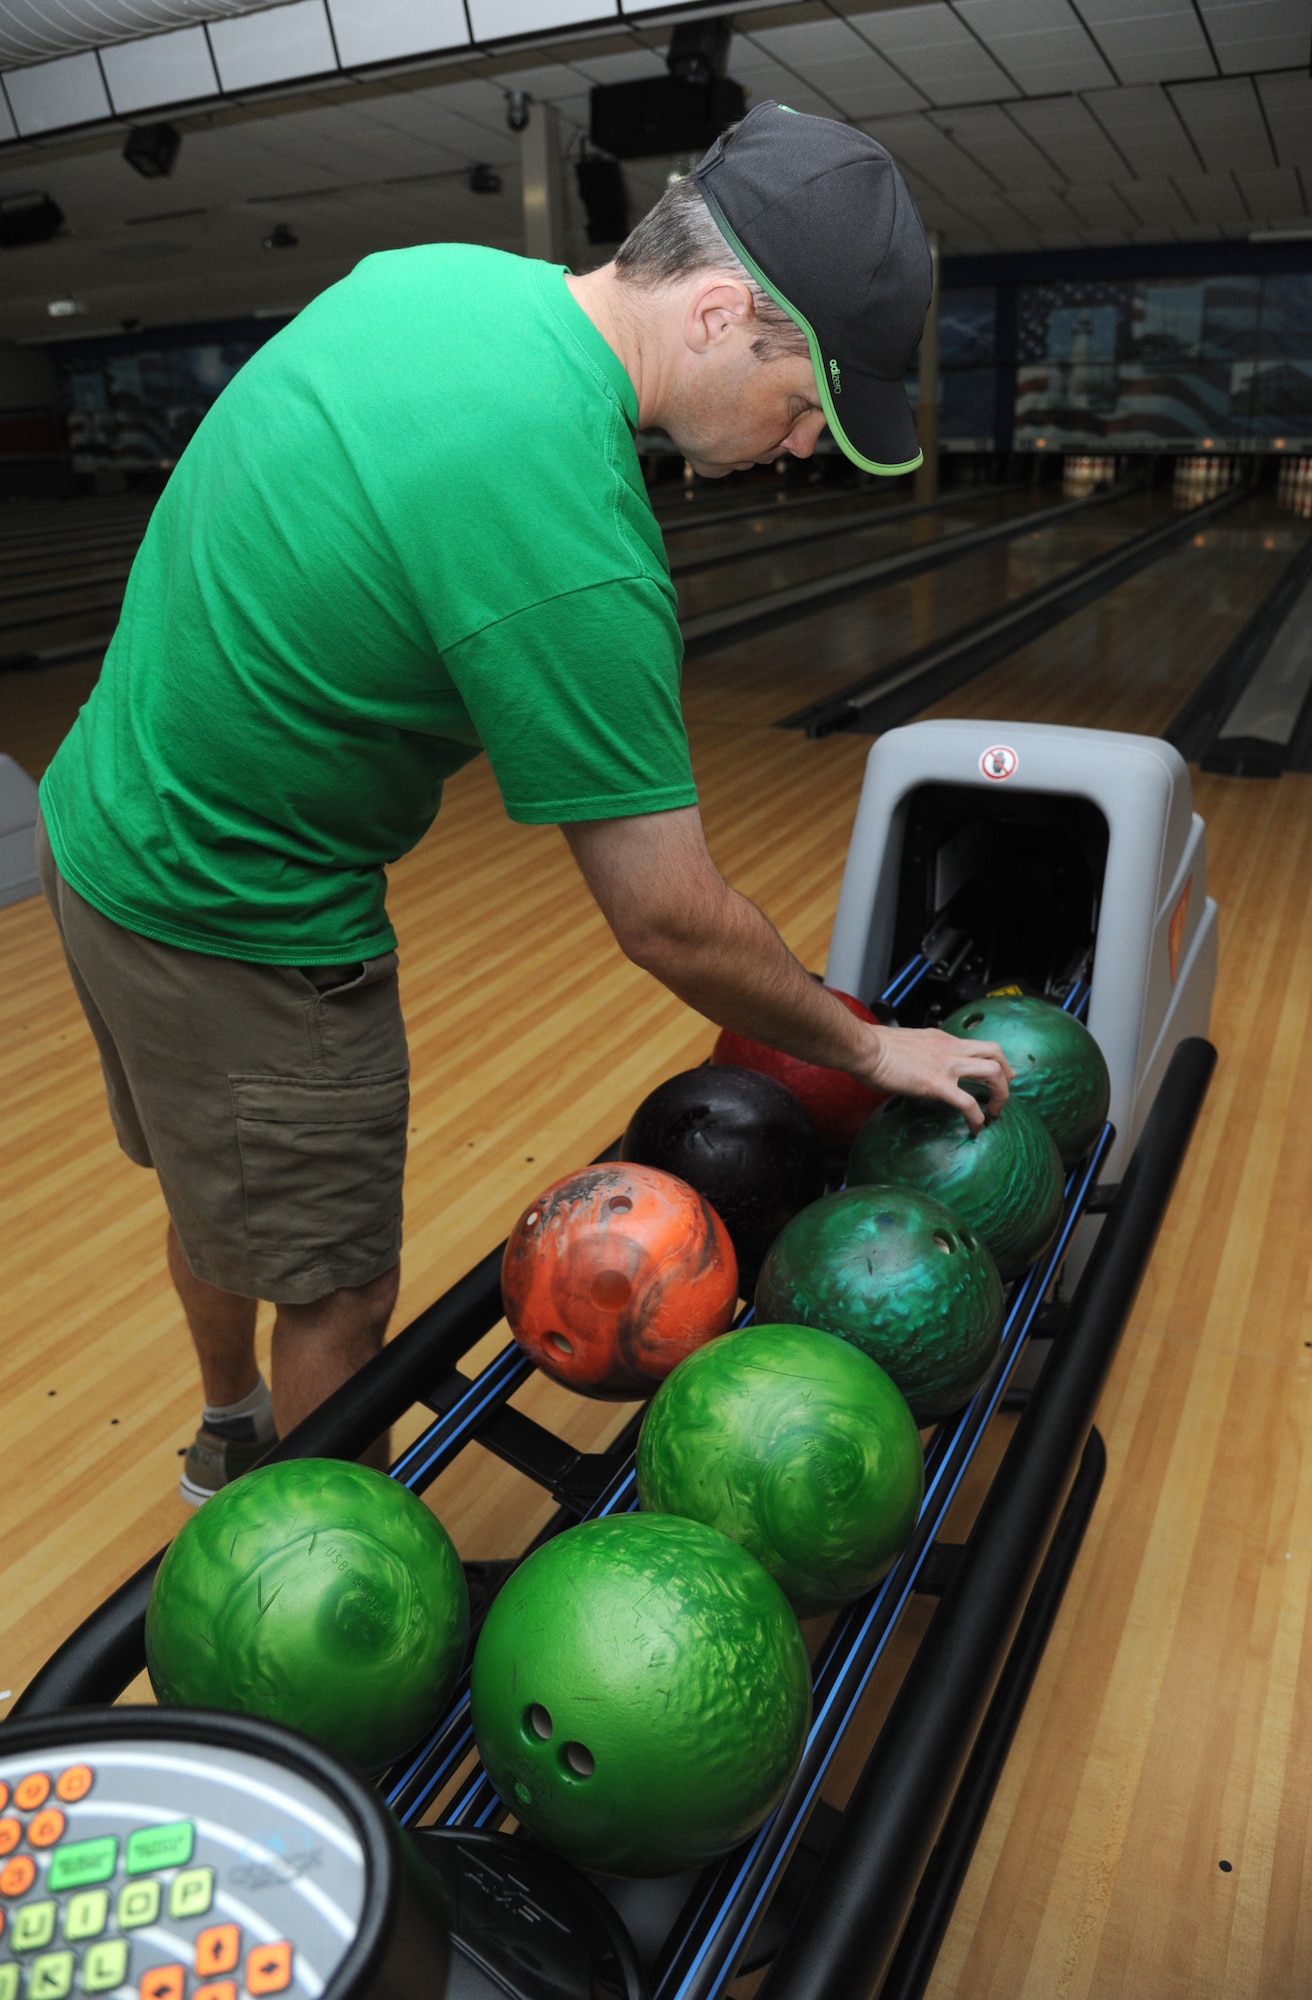 Maj. Jason Freels, 602nd Training Group (Provisional) chief of plans and analysis, selects his ball during a bowling tournament Feb. 13, 2015, at Gaudé Bowling Lanes, Keesler Air Force Base, Miss.  The African-American Heritage Committee hosted the event to celebrate Black History Month. Nineteen teams of five people participated in the tournament.  (U.S. Air Force photo by Kemberly Groue)